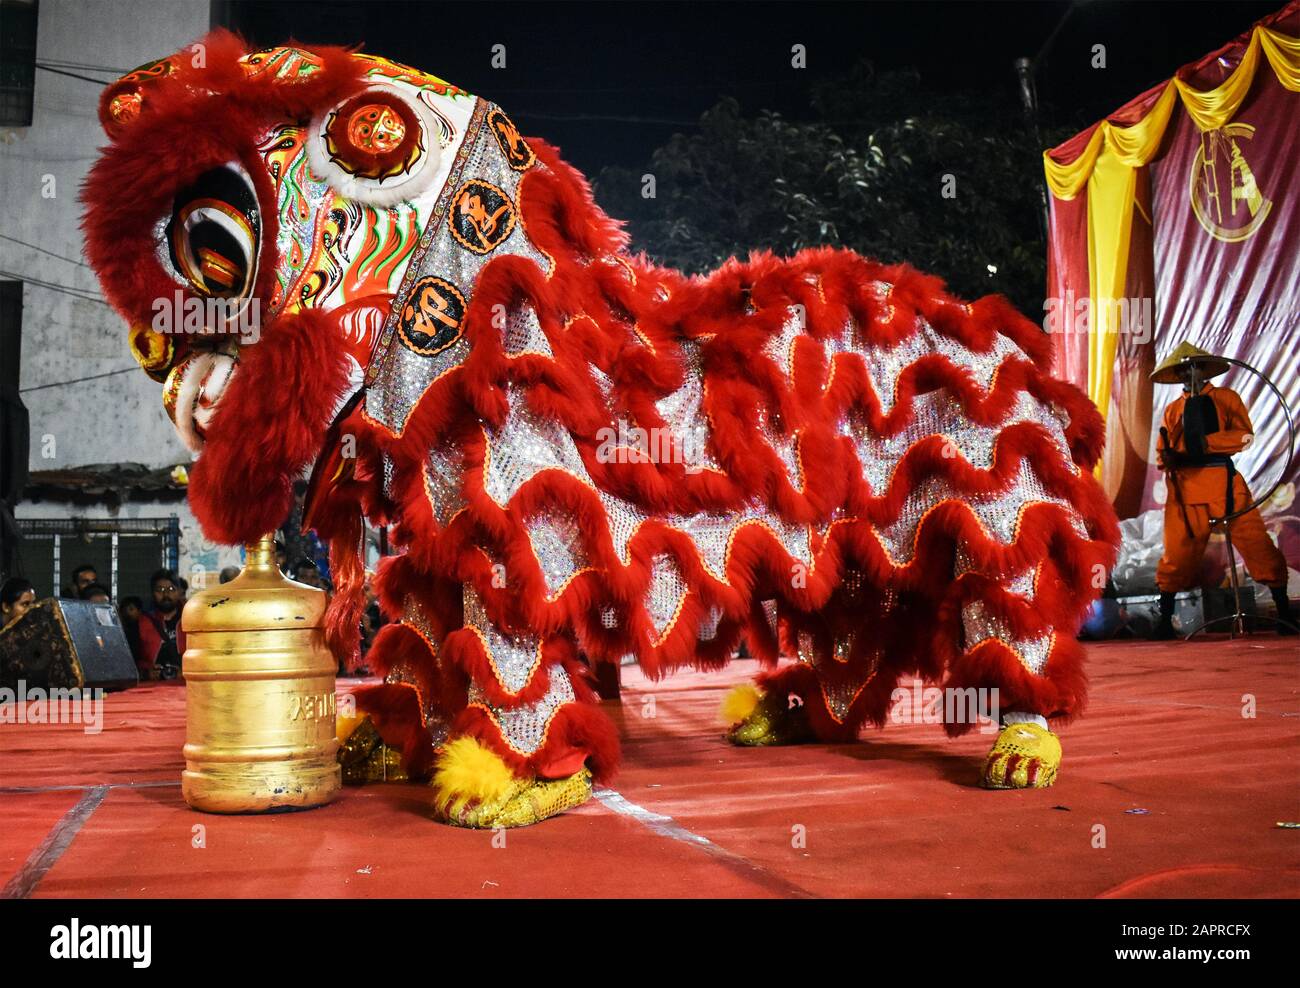 Performers performing the Dragon dance on the occasion of the Chinese New Year festival in Kolkata, India. Stock Photo